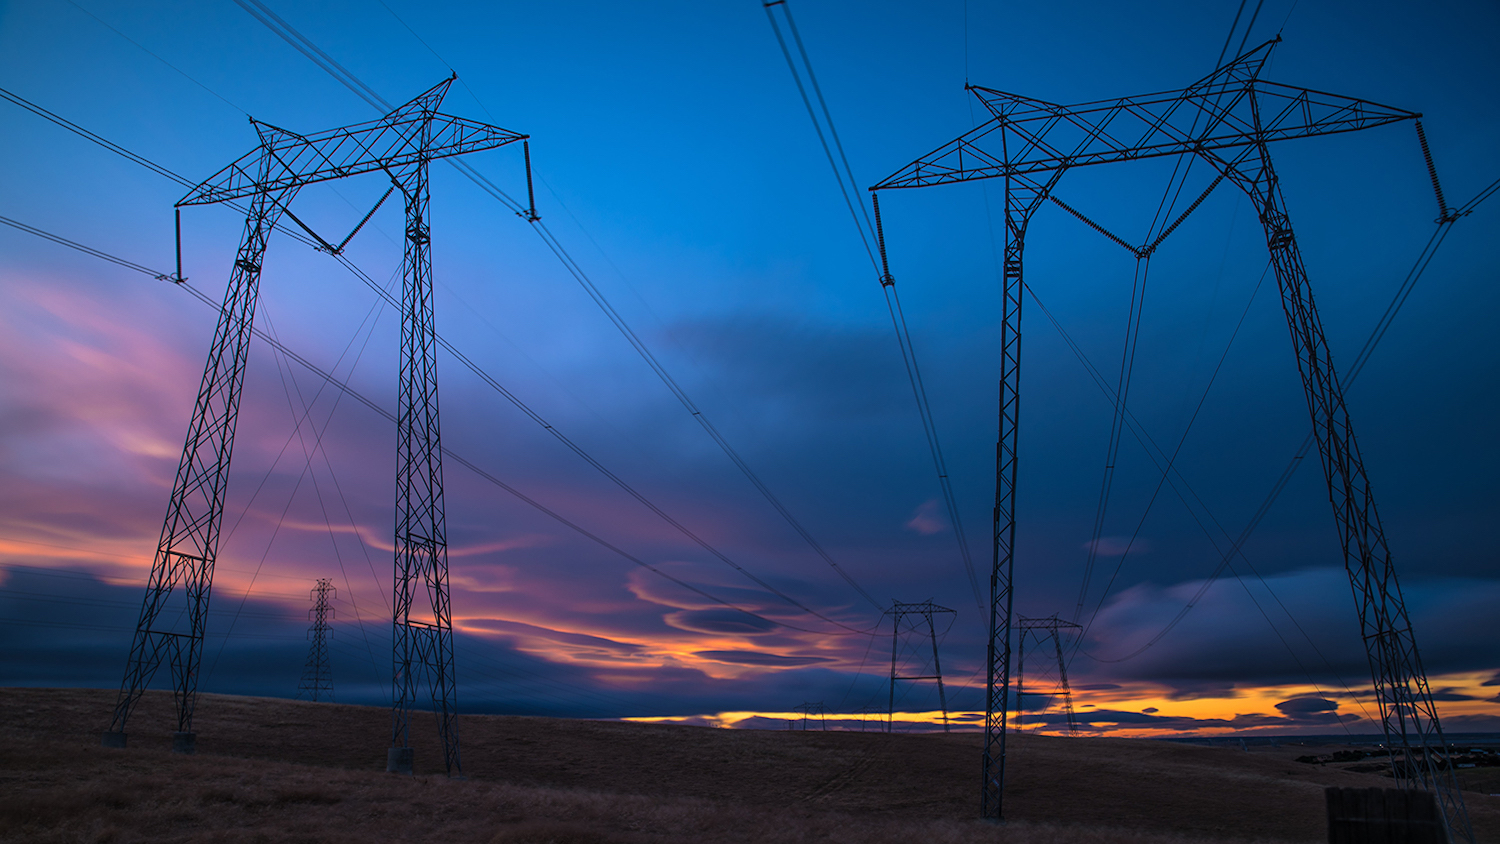 Transmission Lines - Change Could Lead to West Coast Blackouts, Higher Power Costs - College of Natural Resources News - NC State University